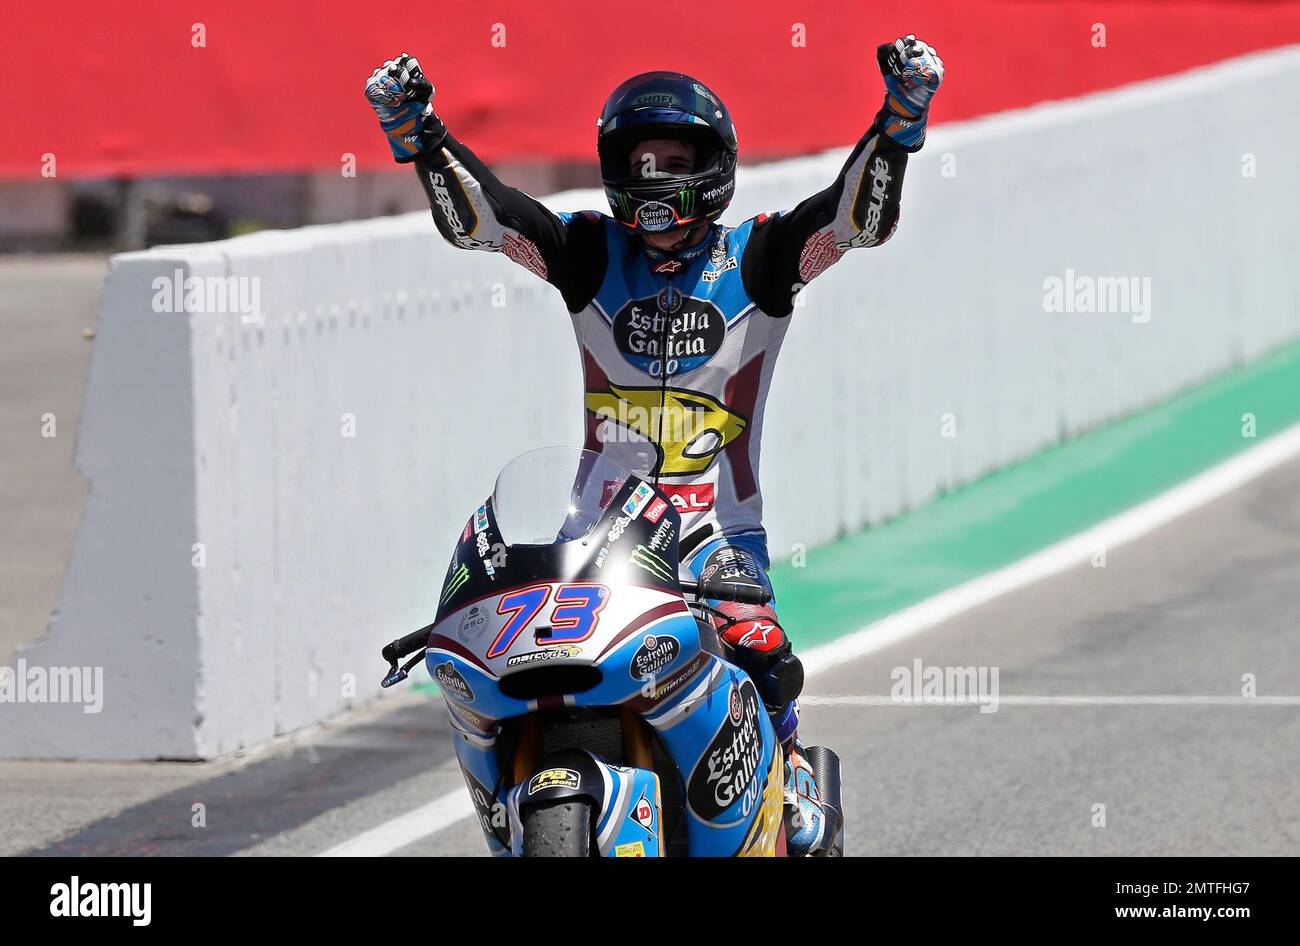 Moto 2 rider Alex Marquez of Spain celebrates after winning the Catalunya  Motorcycle Grand Prix at